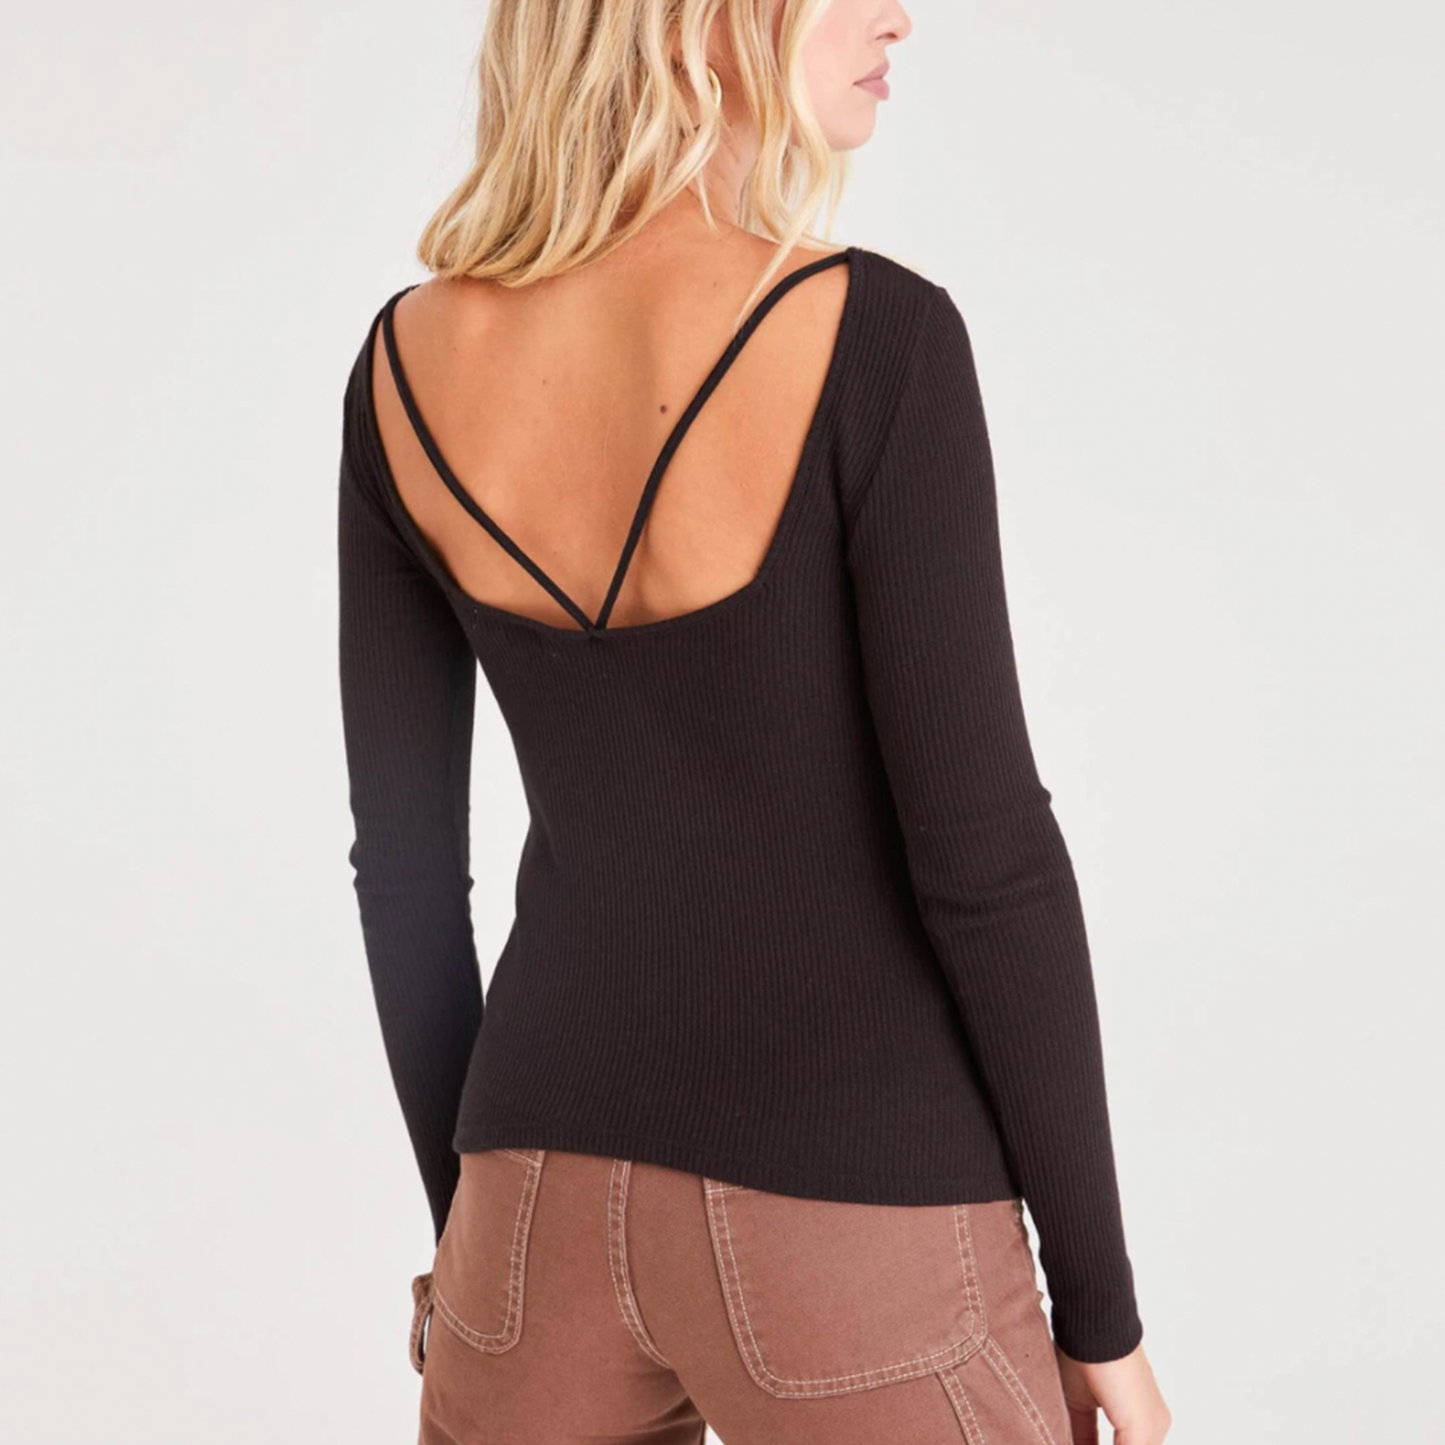 Project Social T Minah Scoop Back Long Sleeve. Body skimming and ultra flattering, a top that you're going to want to show off, especially the back. Made in a soft ribbed fabric, this top features a strappy scoop back. Wear with your favorite bottom, because this top will elevate any look